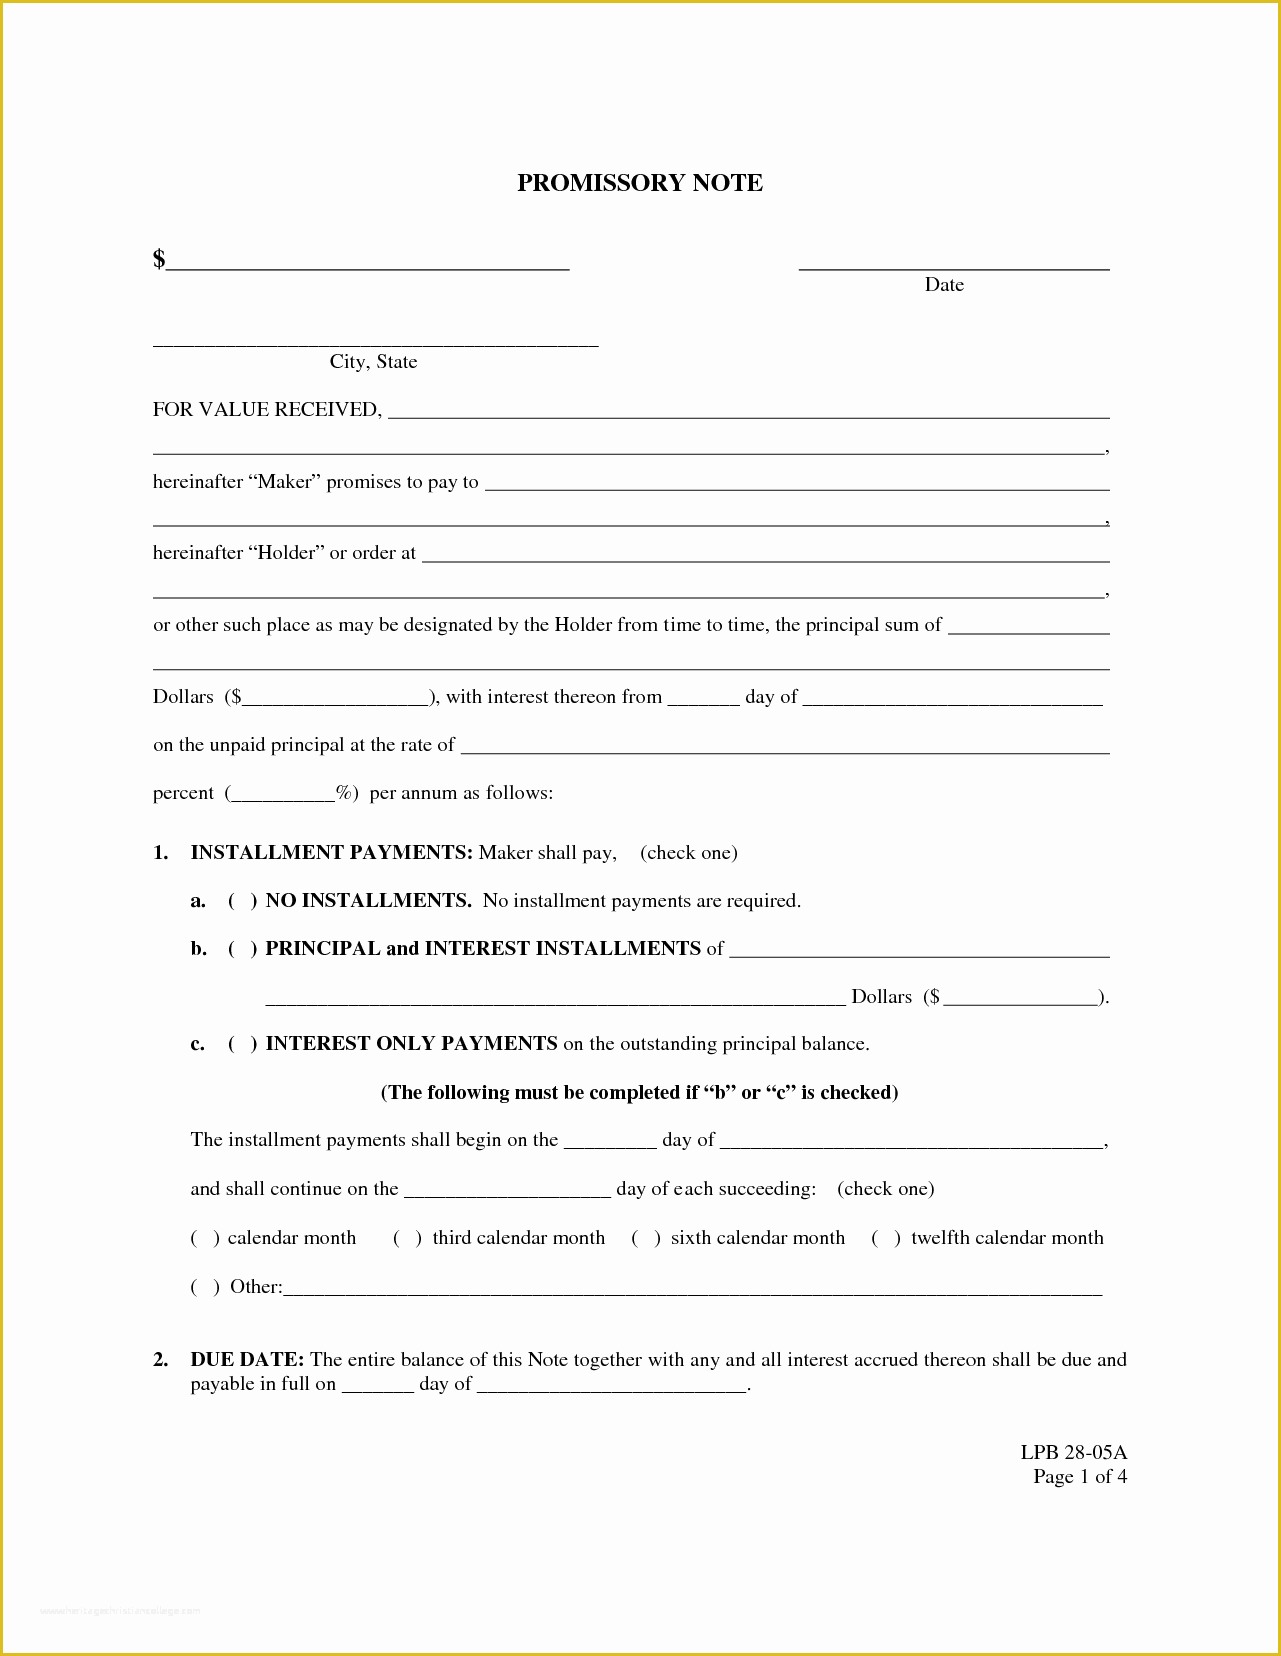 Free Promissory Note Template for A Vehicle Of Vehicle Promissory Note Template Portablegasgrillweber